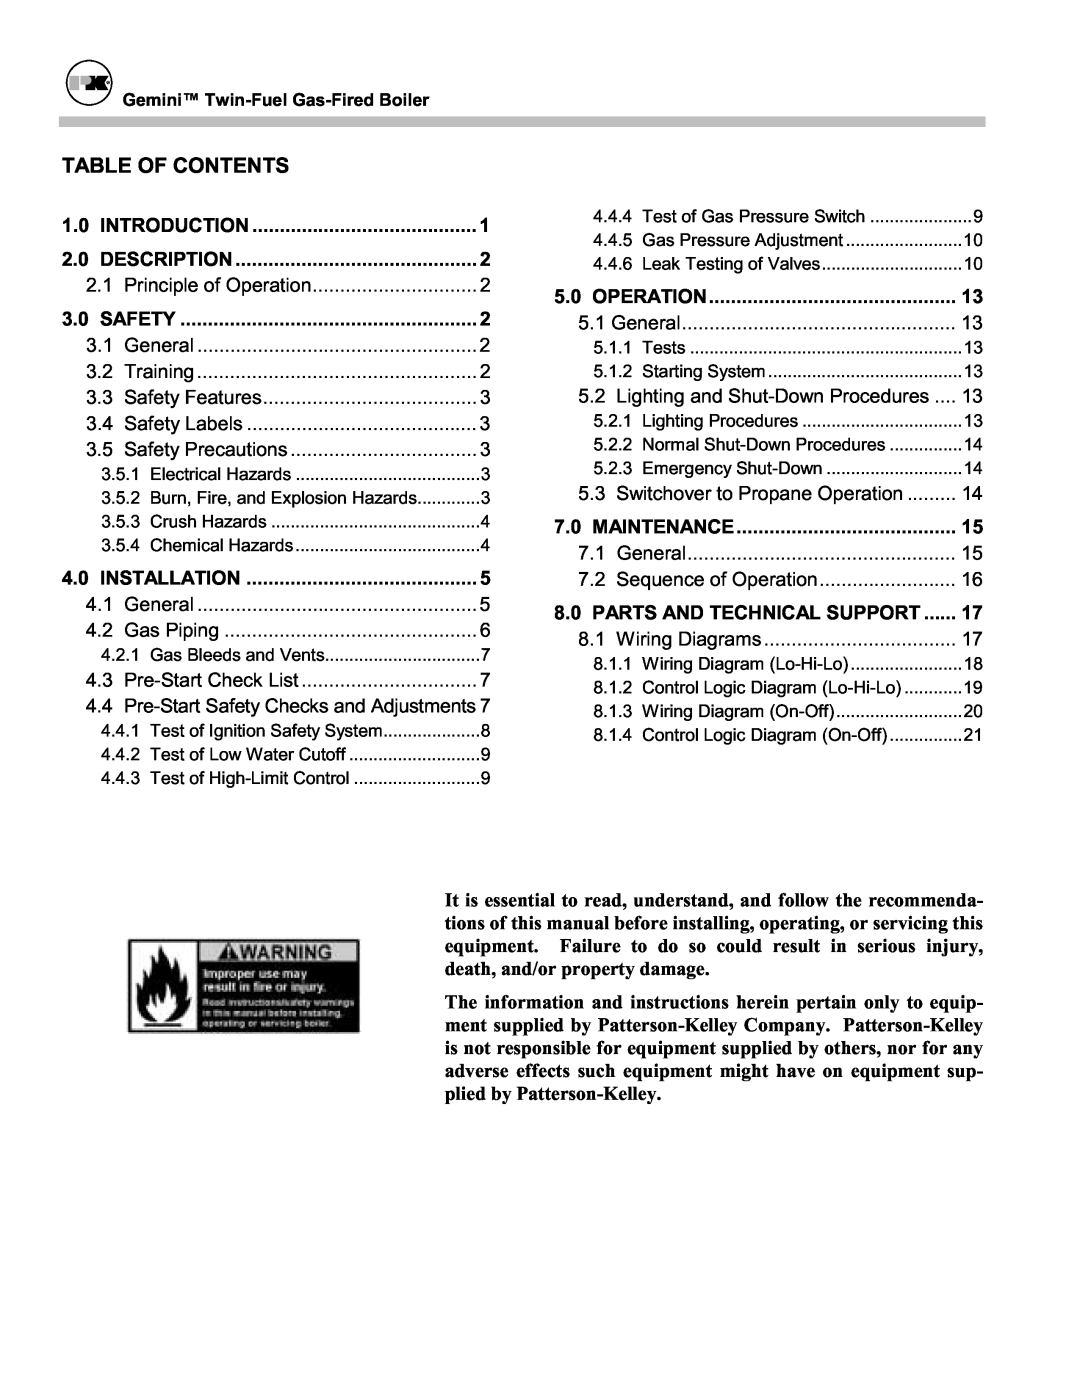 Patterson-Kelley TBIG-03 Introduction, Description, Safety, Installation, Operation, Maintenance, Table Of Contents 